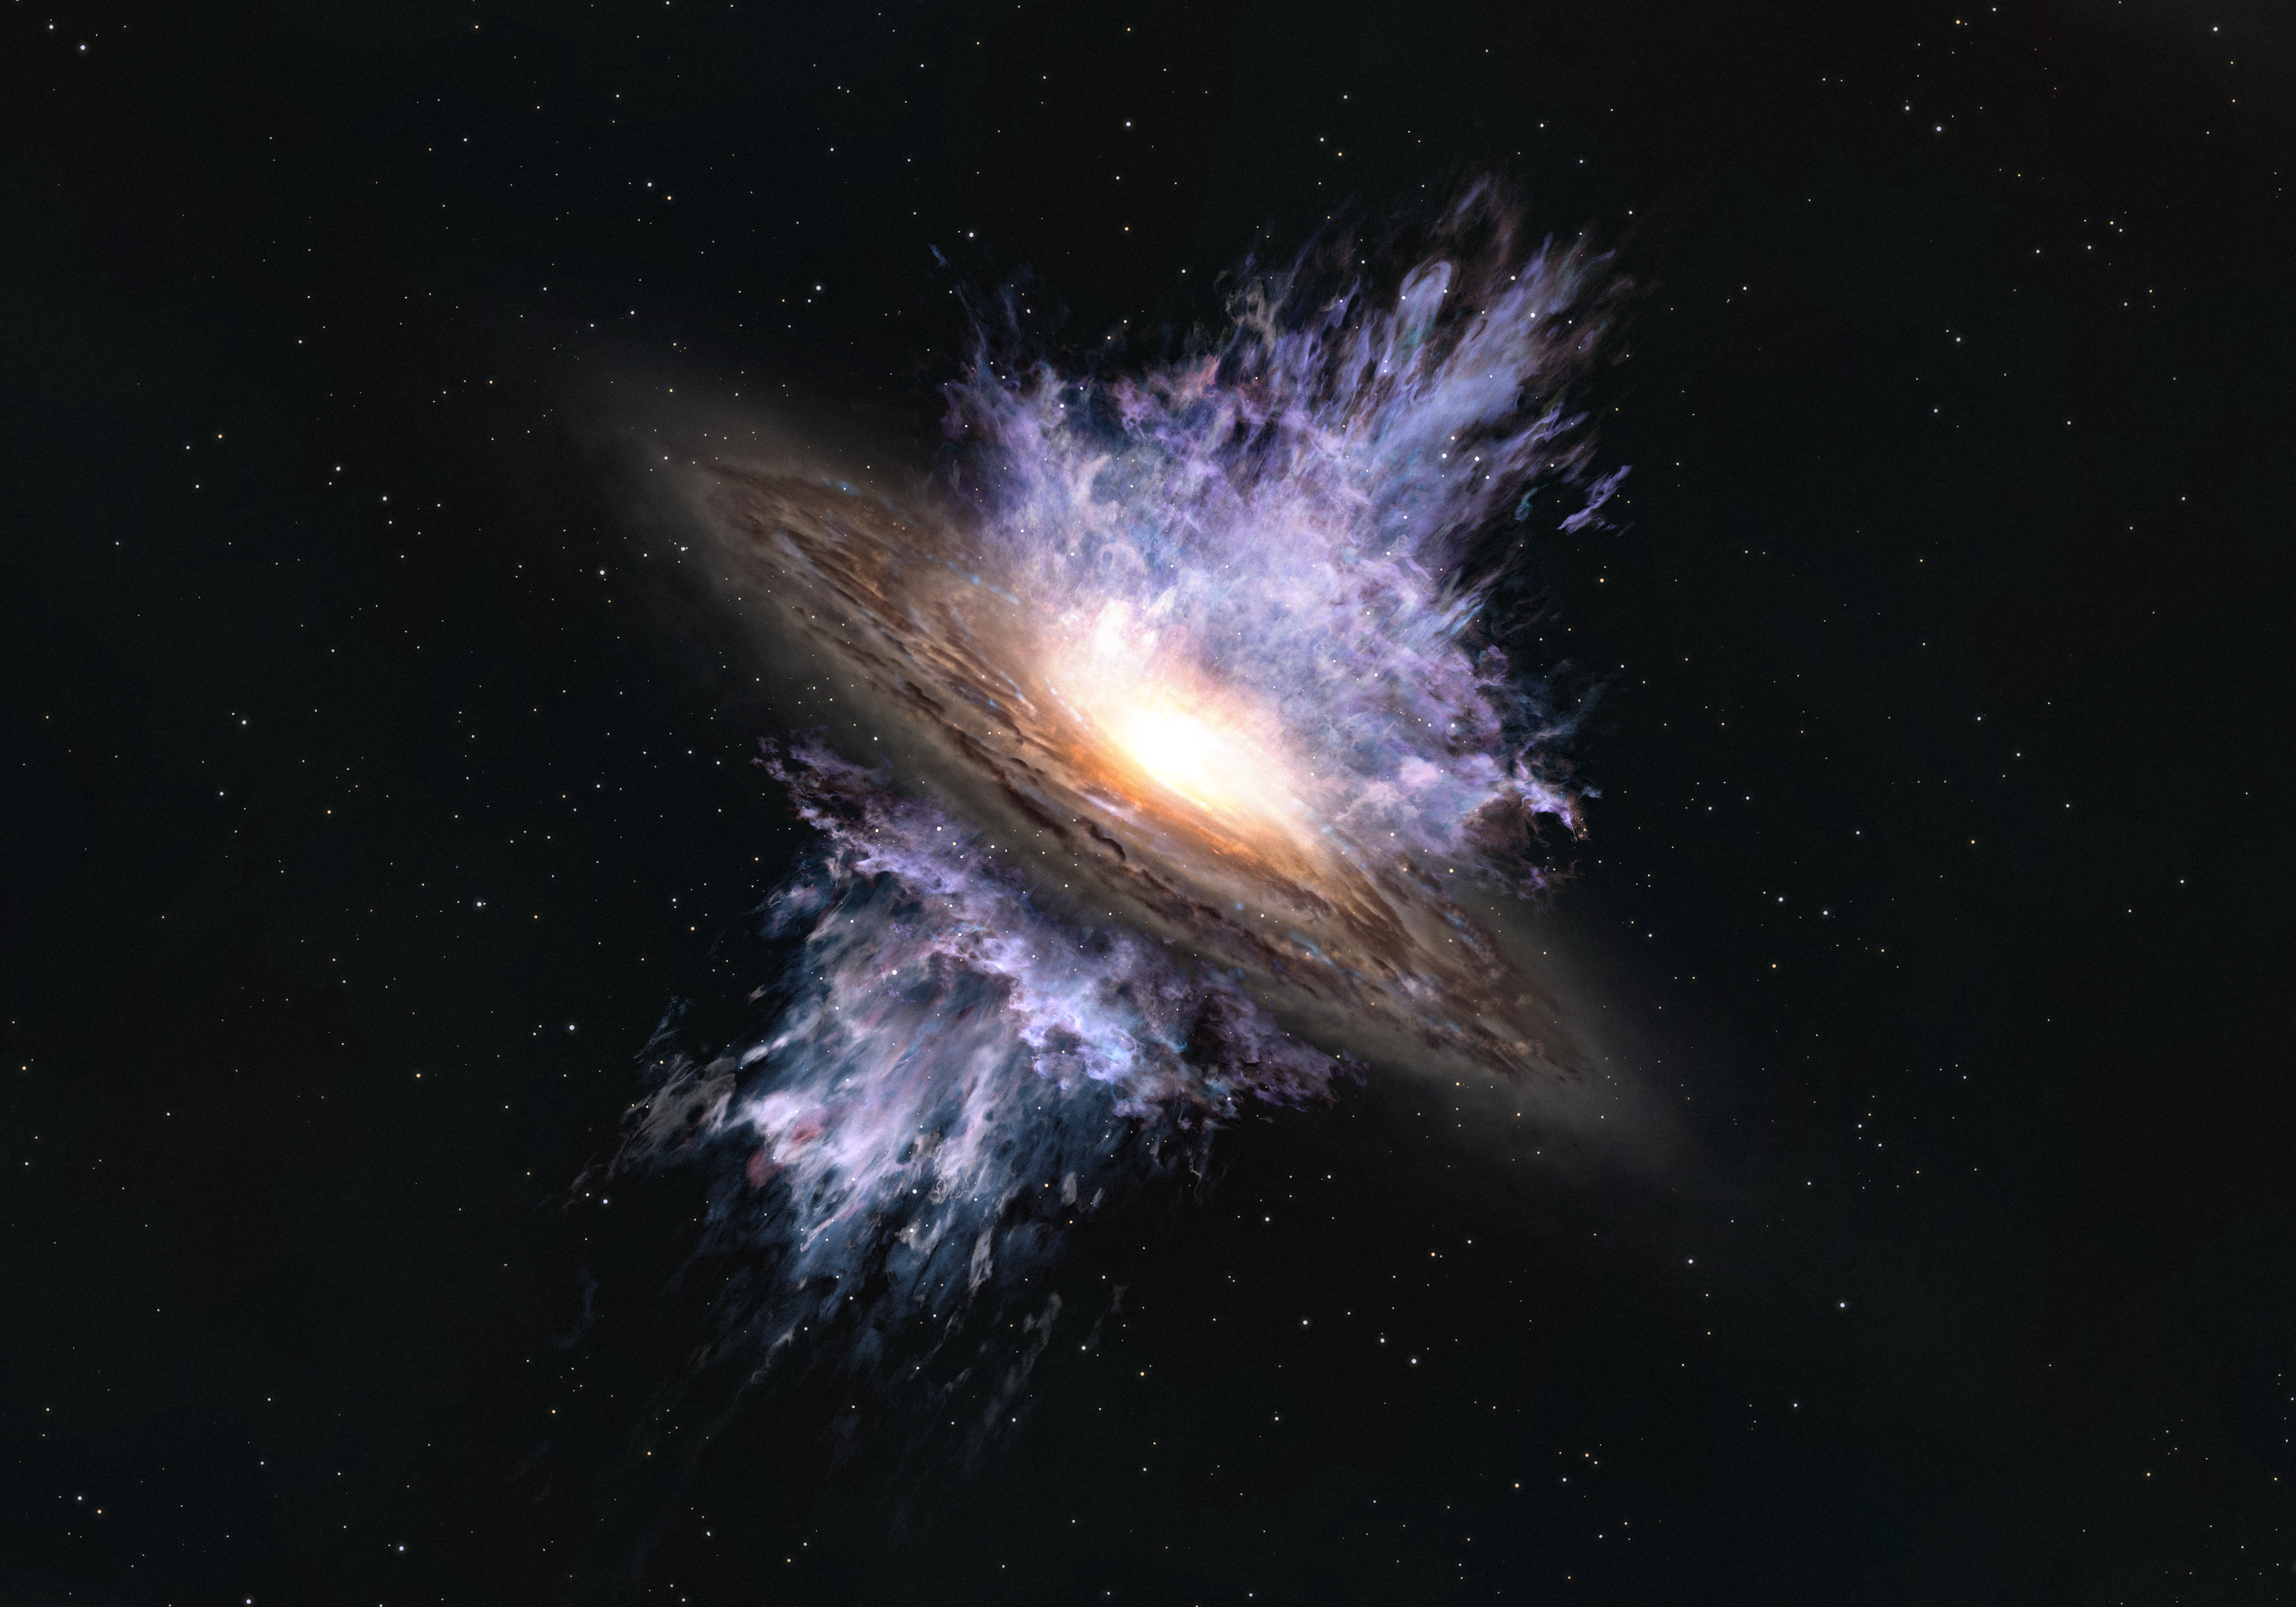 Artist's impression of a galactic wind driven by a supermassive black hole located in the center of a galaxy. The intense energy emanating from the black hole creates a galaxy-scale flow of gas that blows away the interstellar matter that is the material for forming stars. Credit: ALMA (ESO/NAOJ/NRAO)